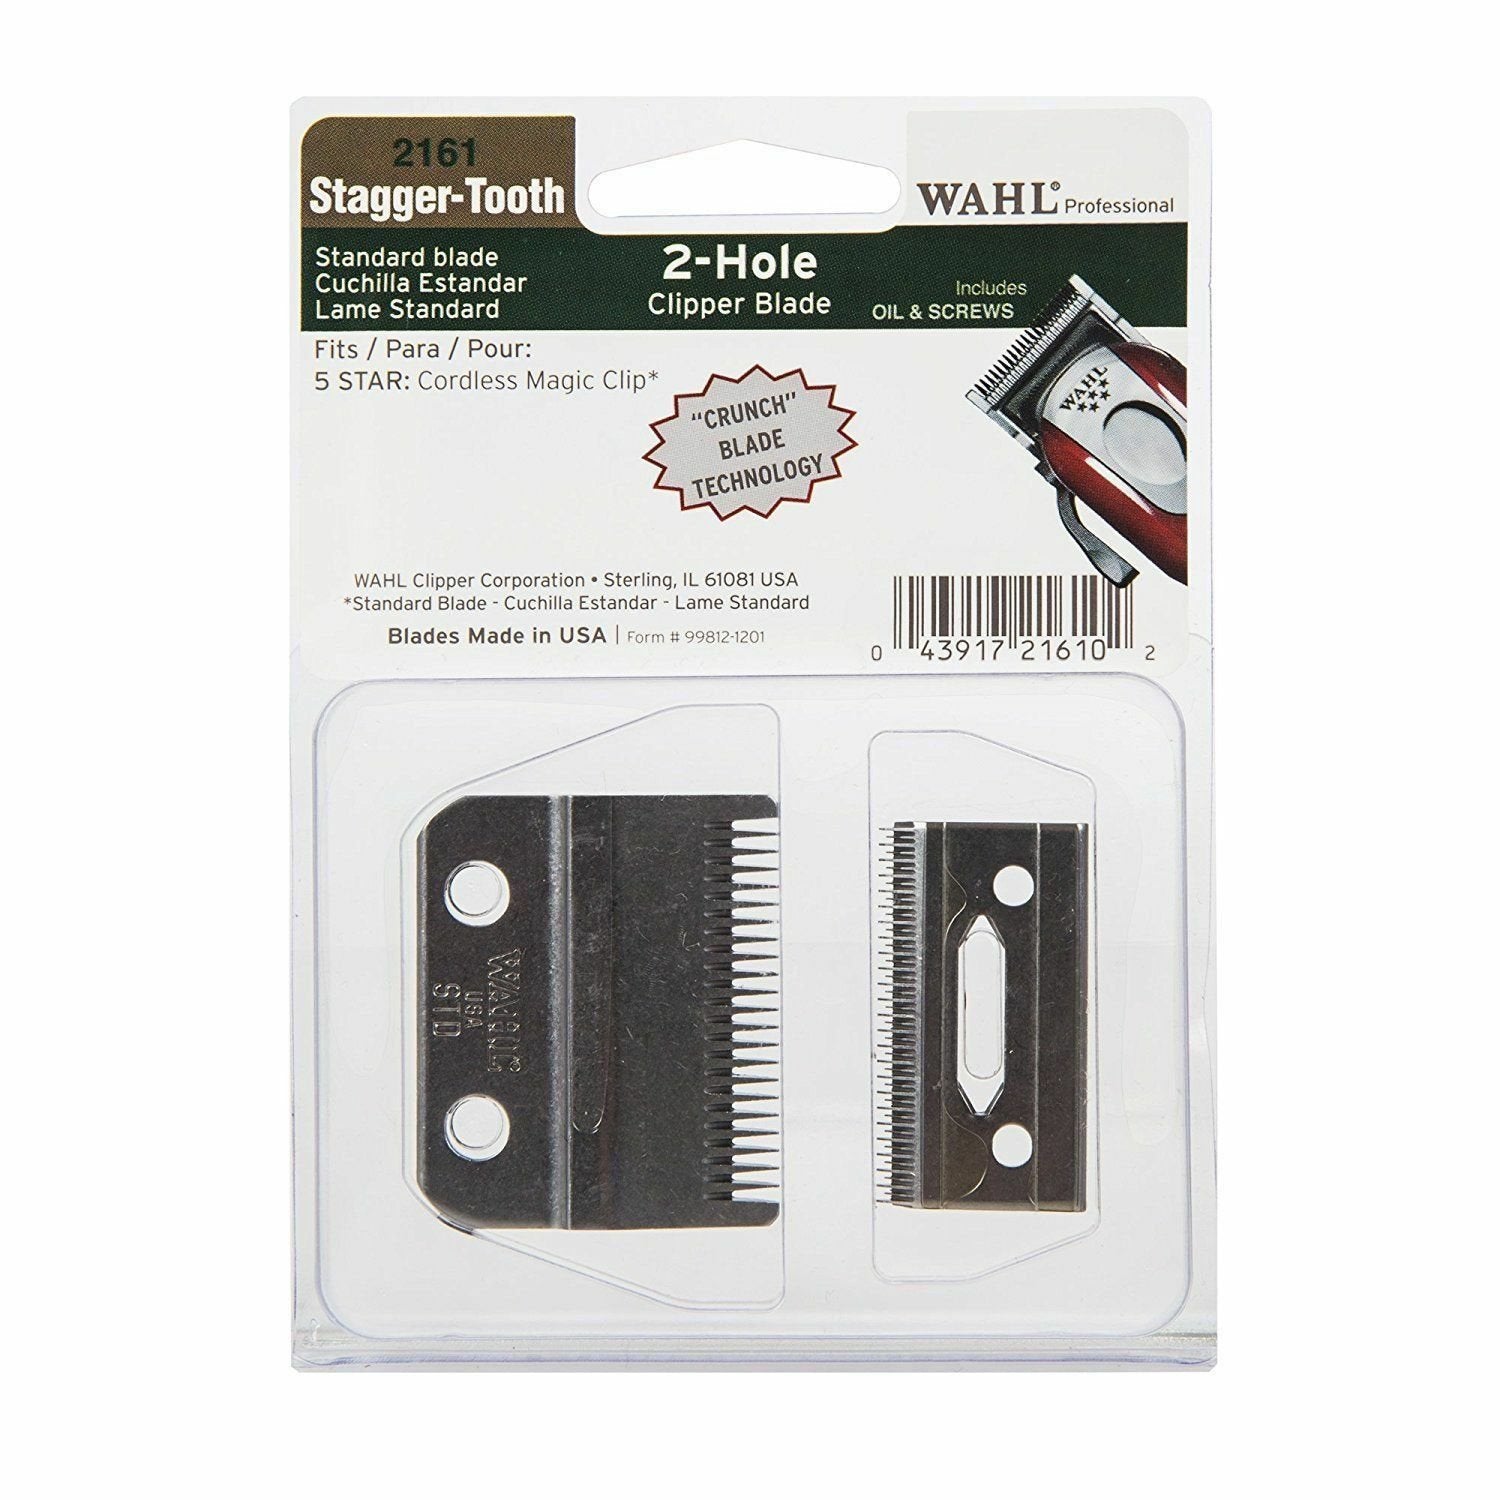 Wahl Stagger Tooth Clipper Blade 2161 | Wahl